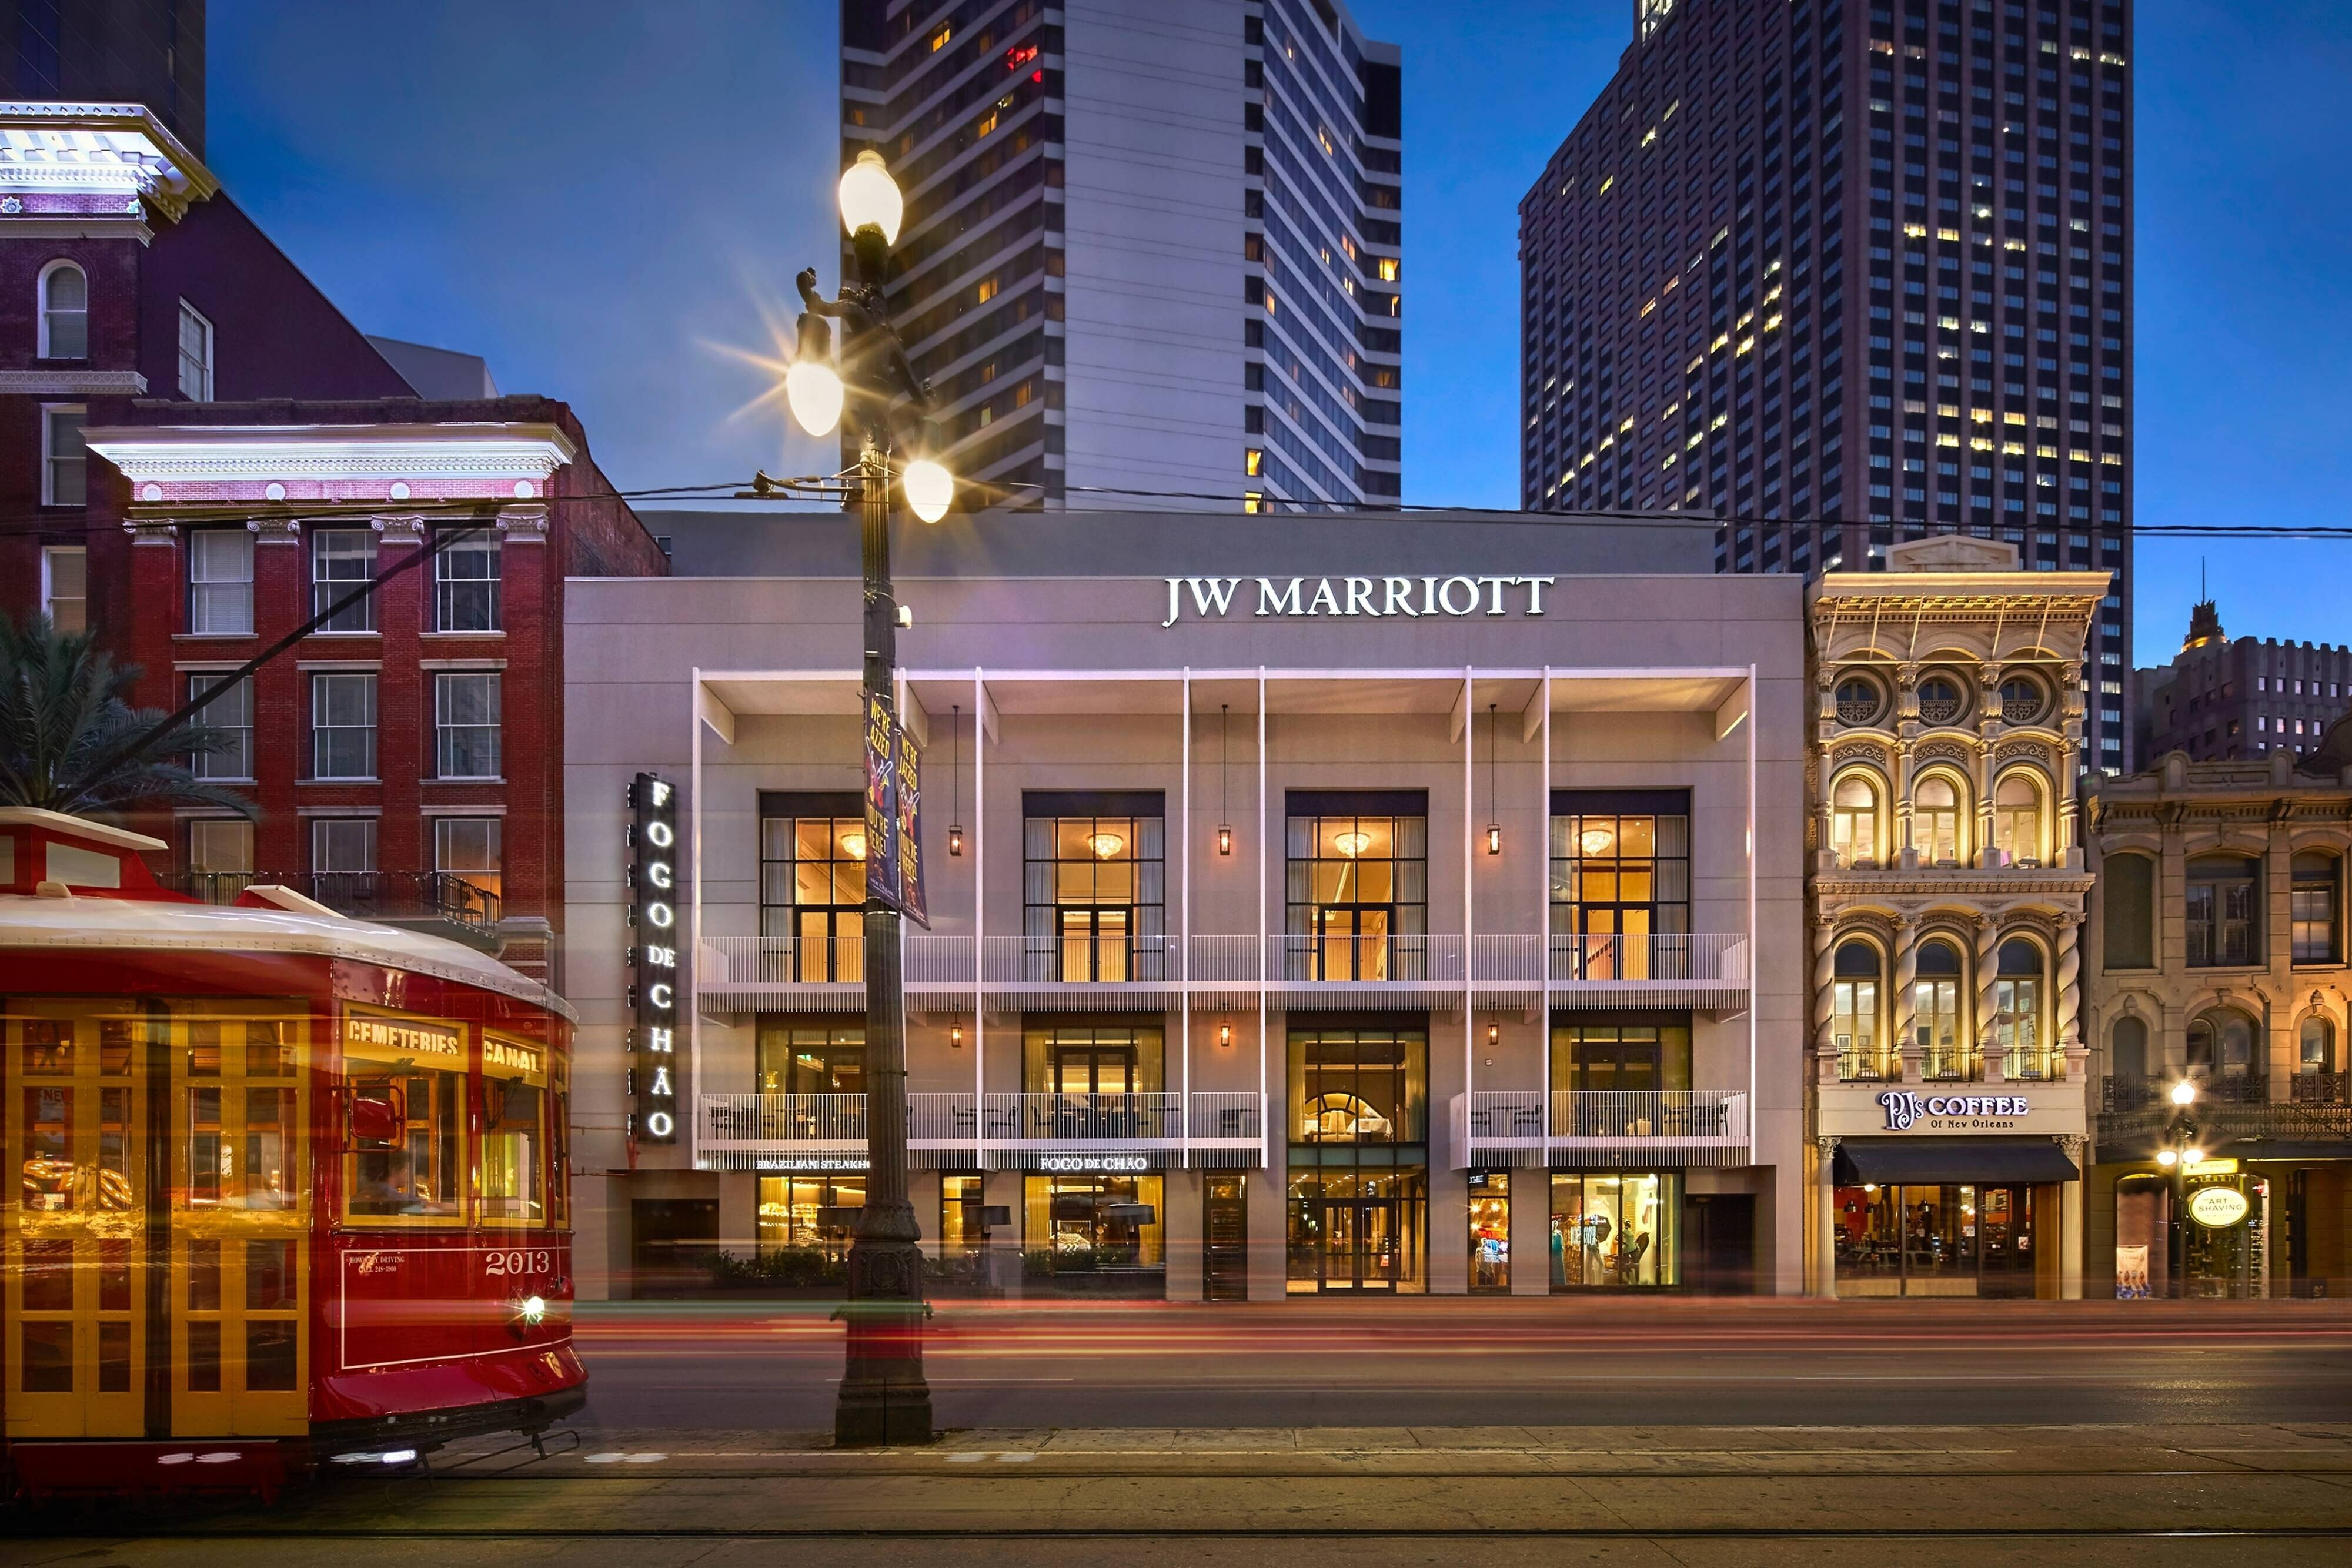 Photo of JW Marriott New Orleans, New Orleans, LA